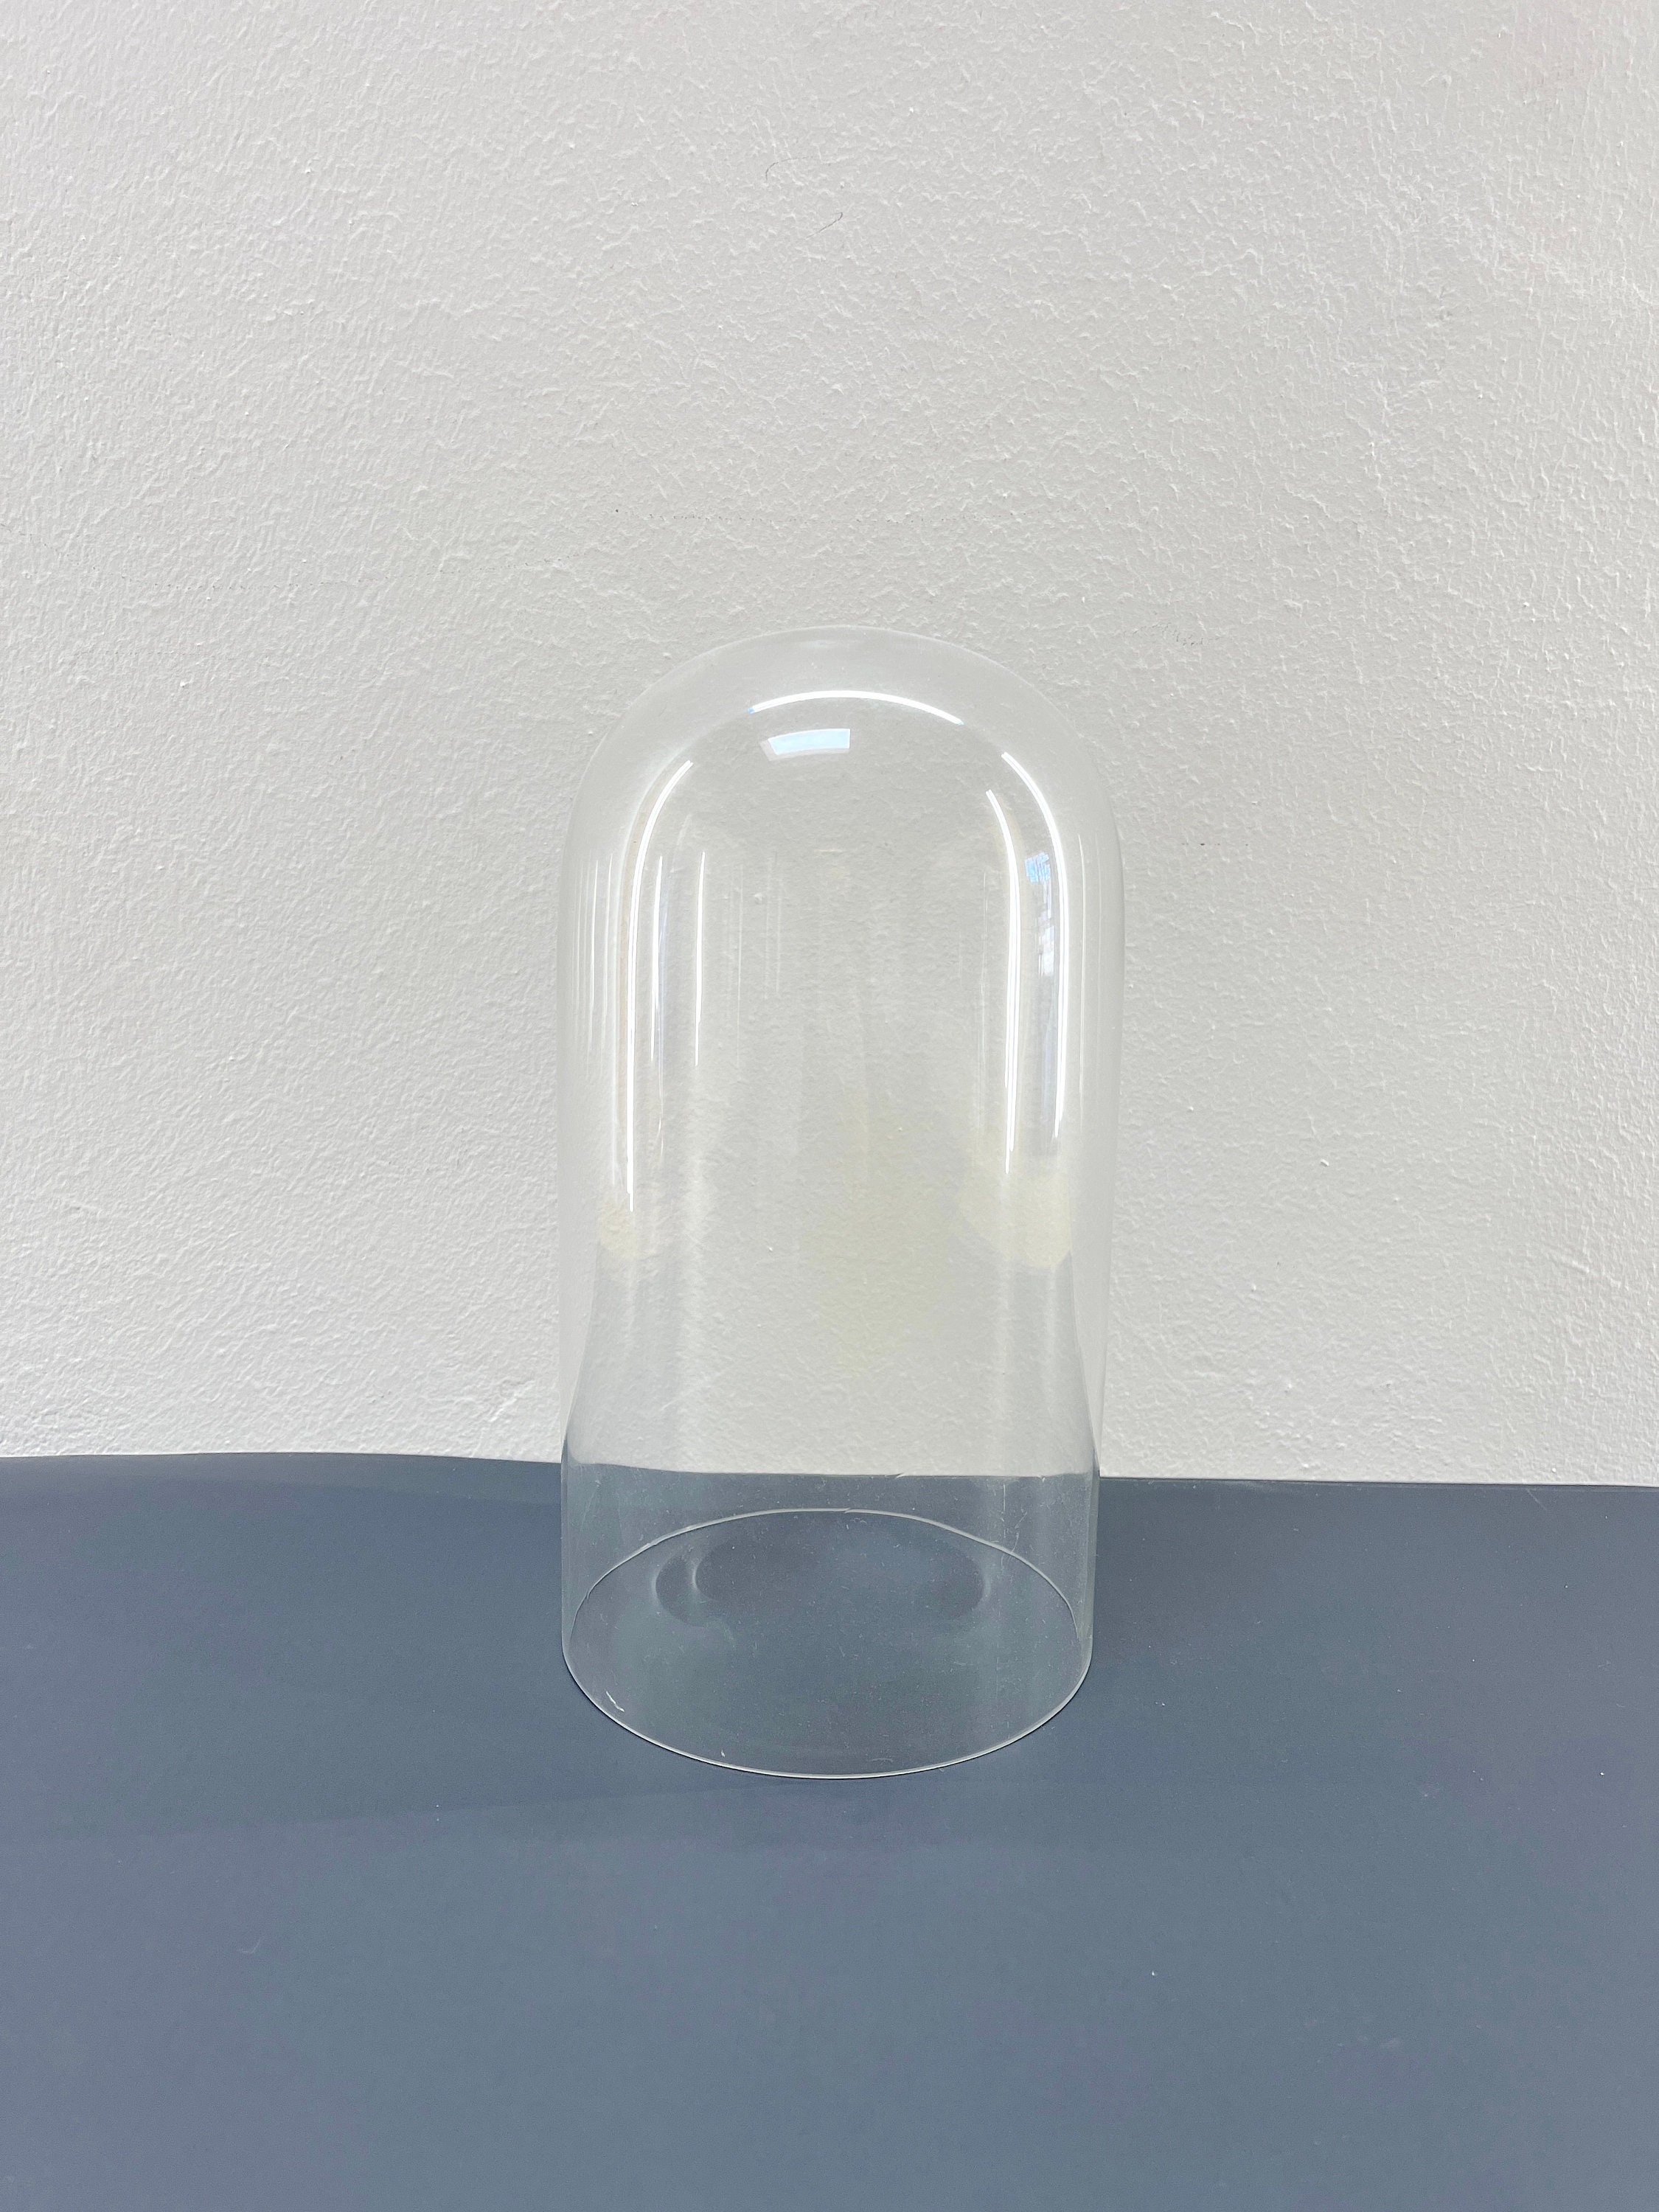 12 Clear Plastic Domes with snap in Bottom 4 inches Tall 2-3/8 Diameter